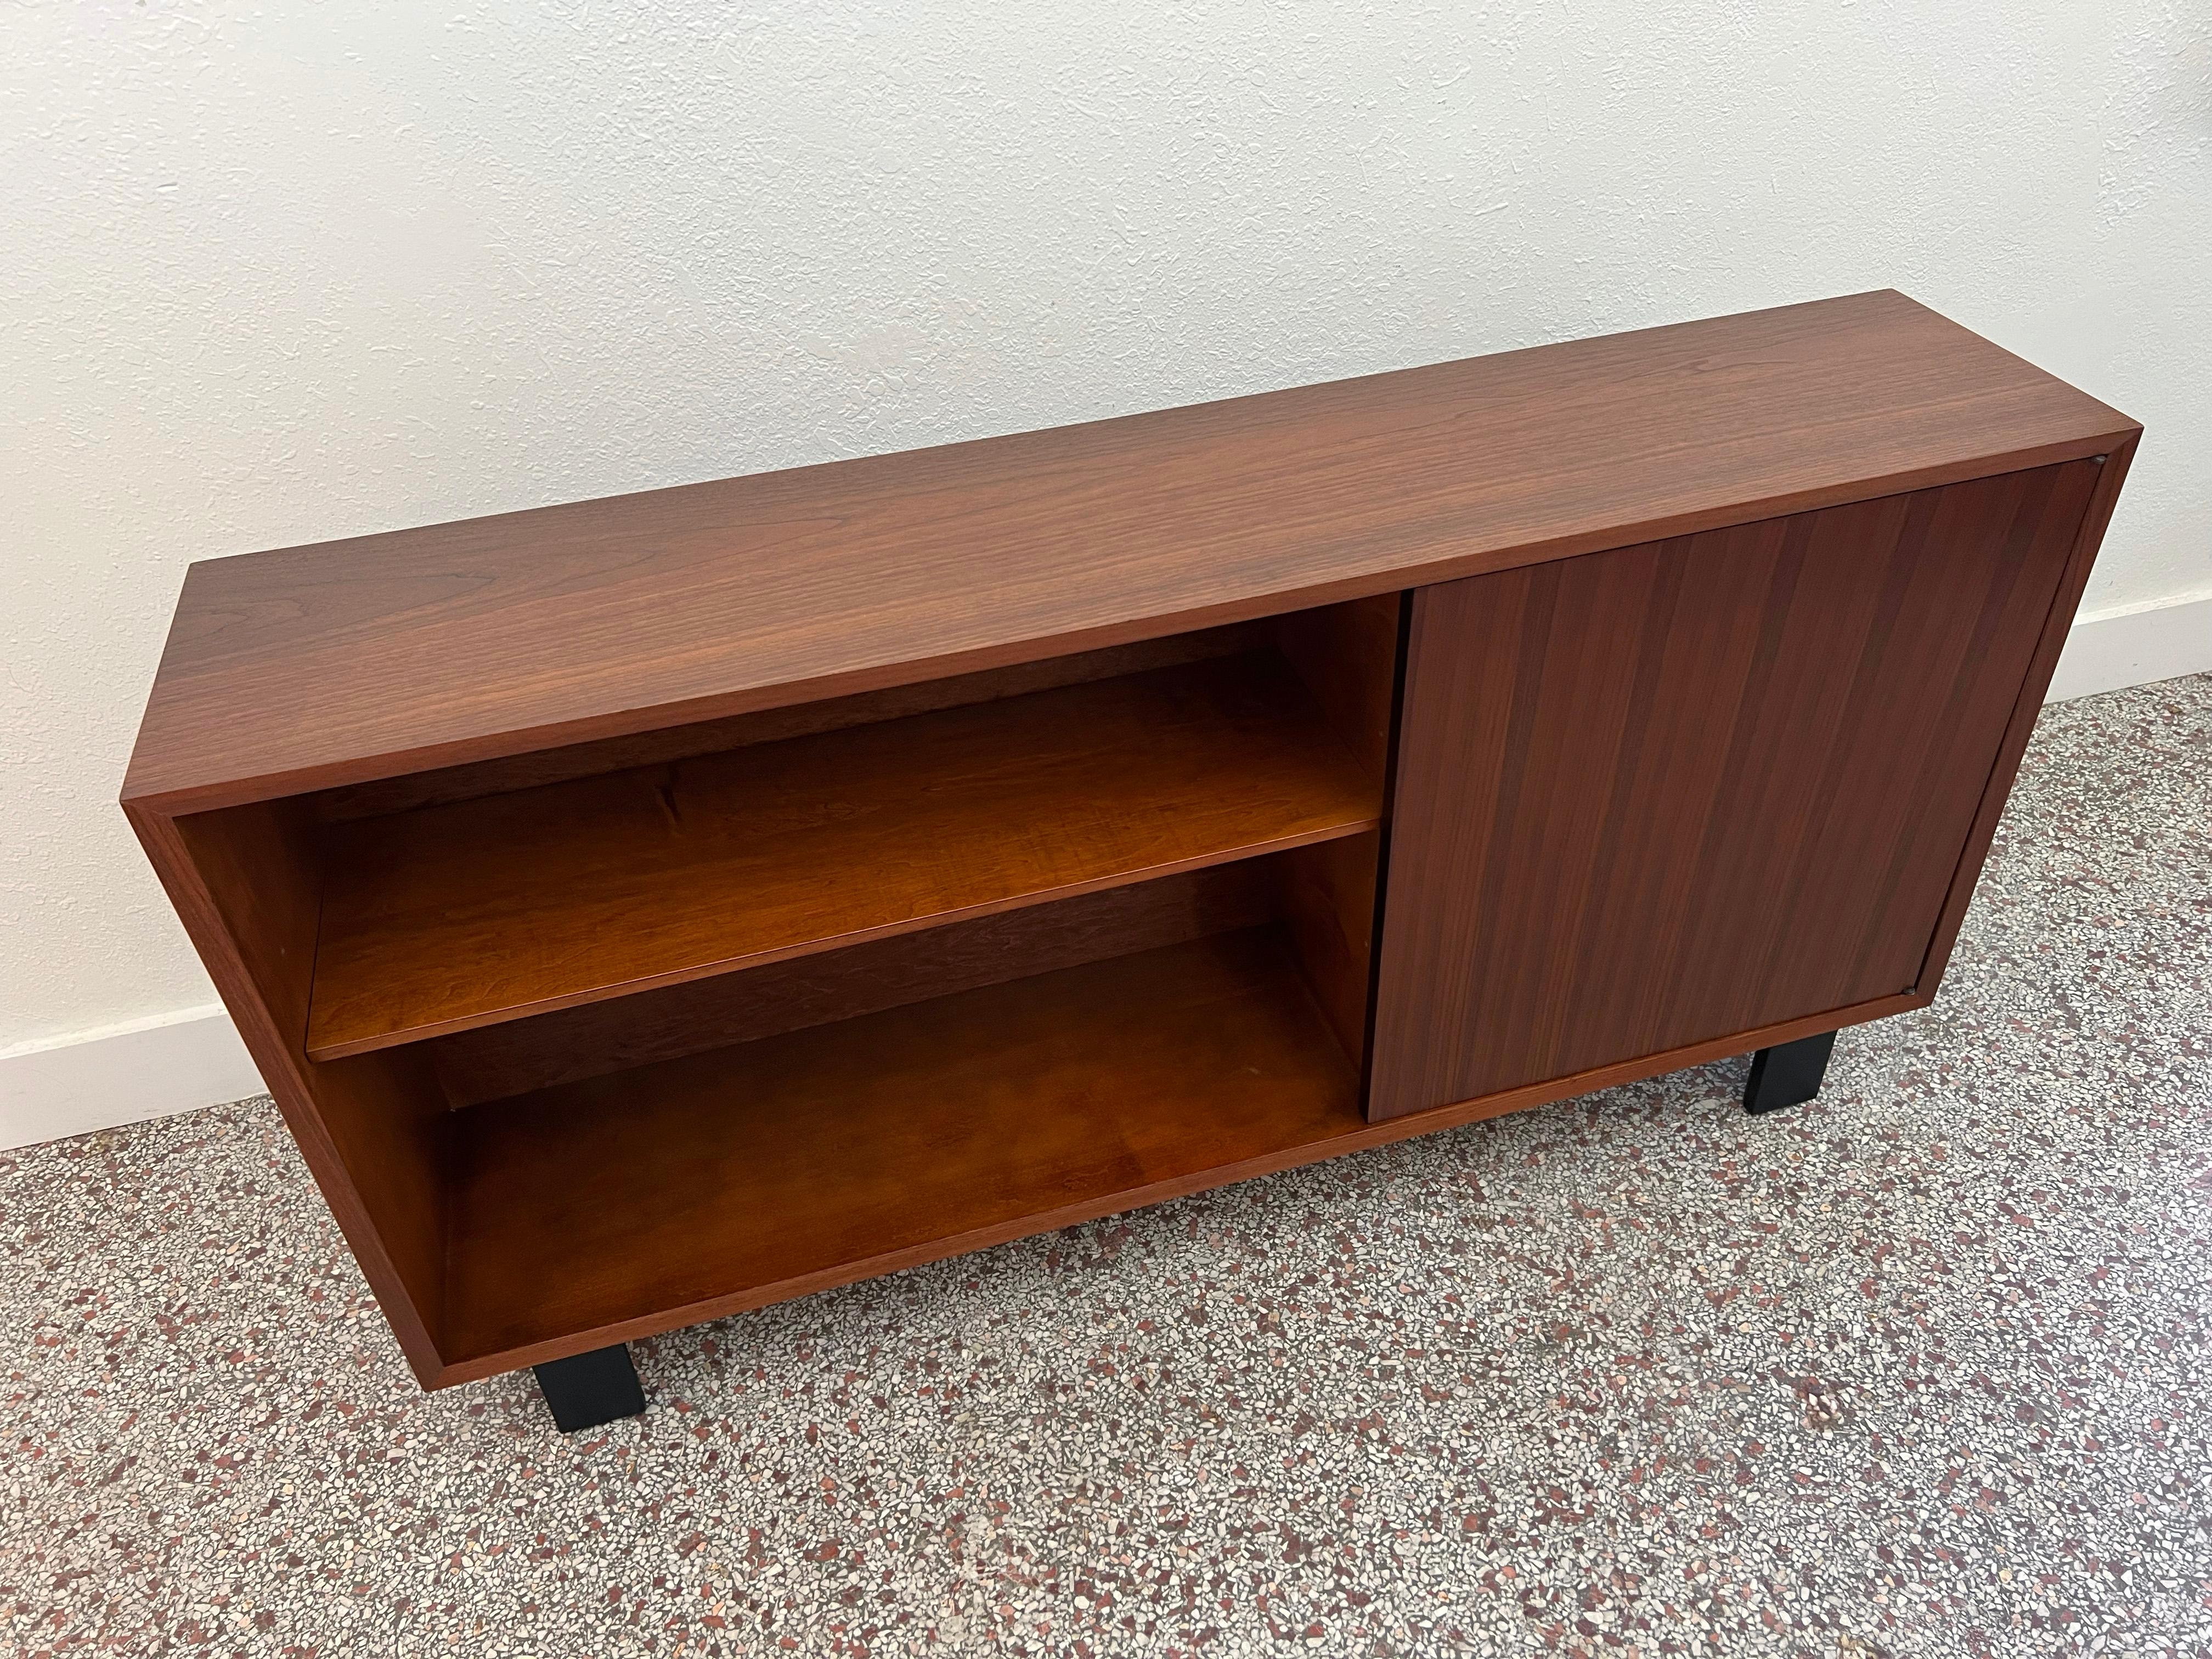 Vintage open shelf cabinet designed by George Nelson for Herman Miller as part of the BCS (Basic Cabinet Series). Crafted in beautiful walnut with adjustable shelving and a single hinged door. 

Designer: George Nelson

Manufacturer: Herman